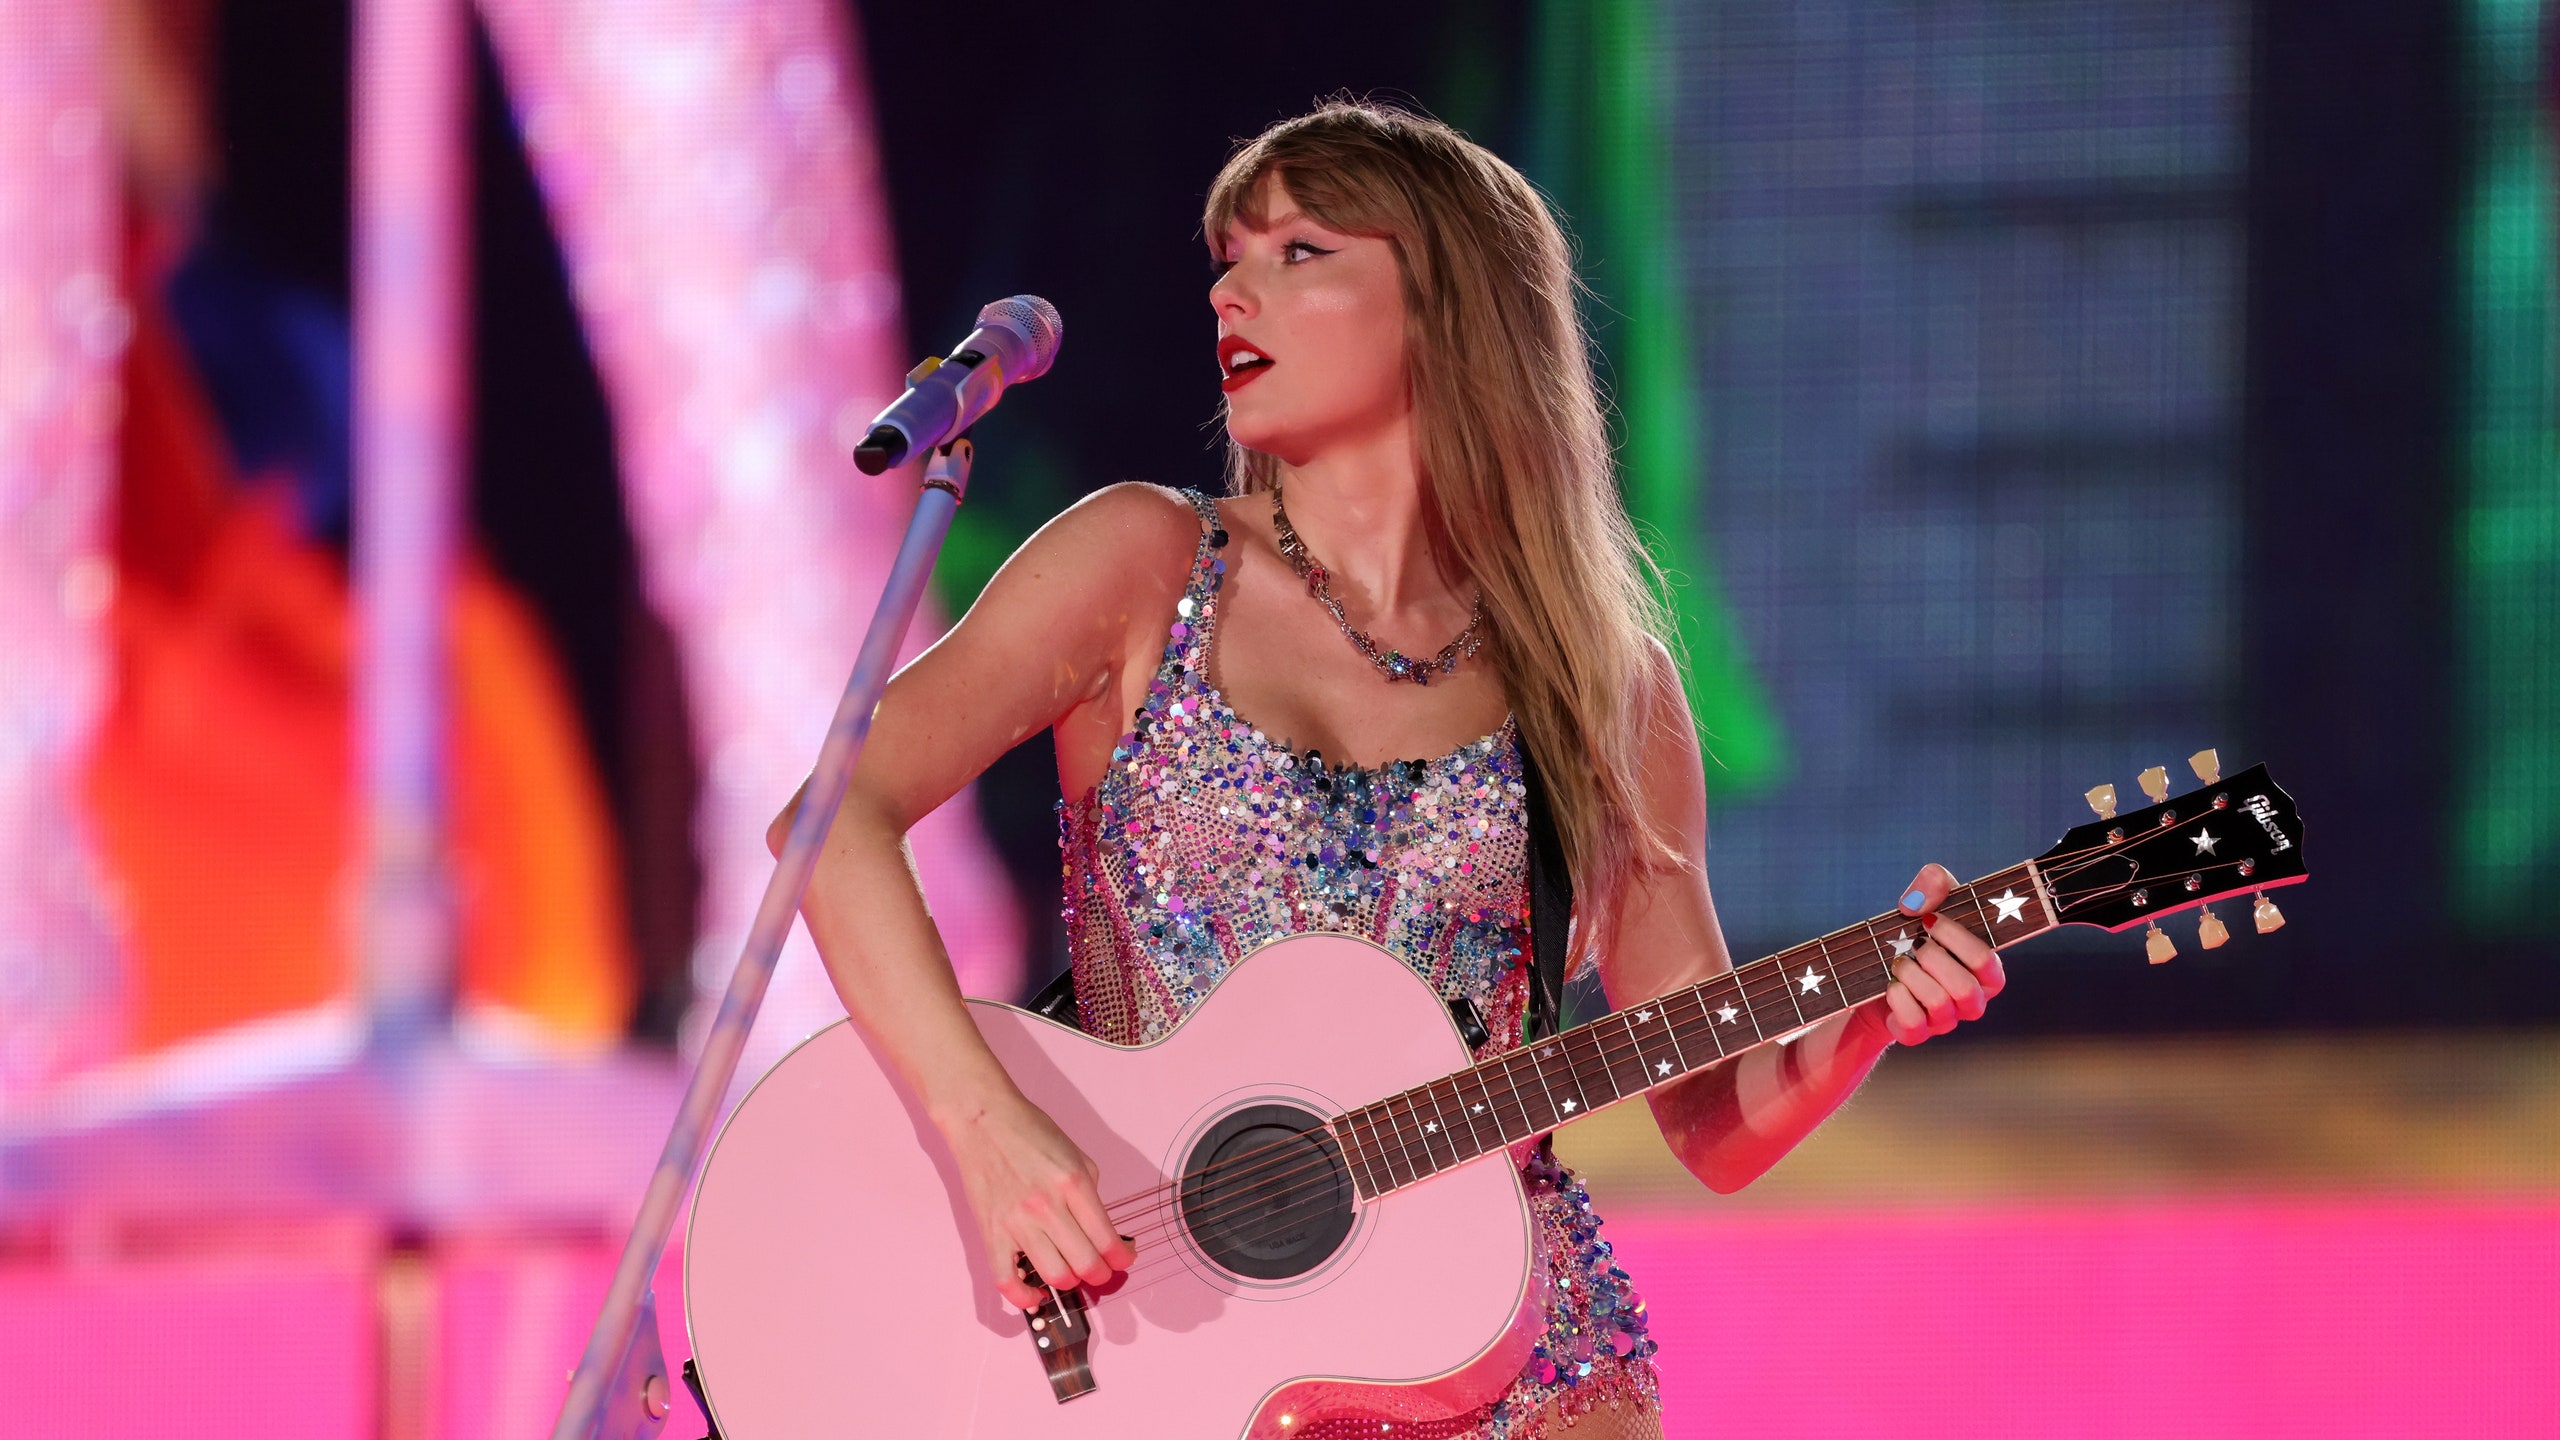 Taylor Swift's Confirms Next Re Record Is Speak Now (Taylor's Version)